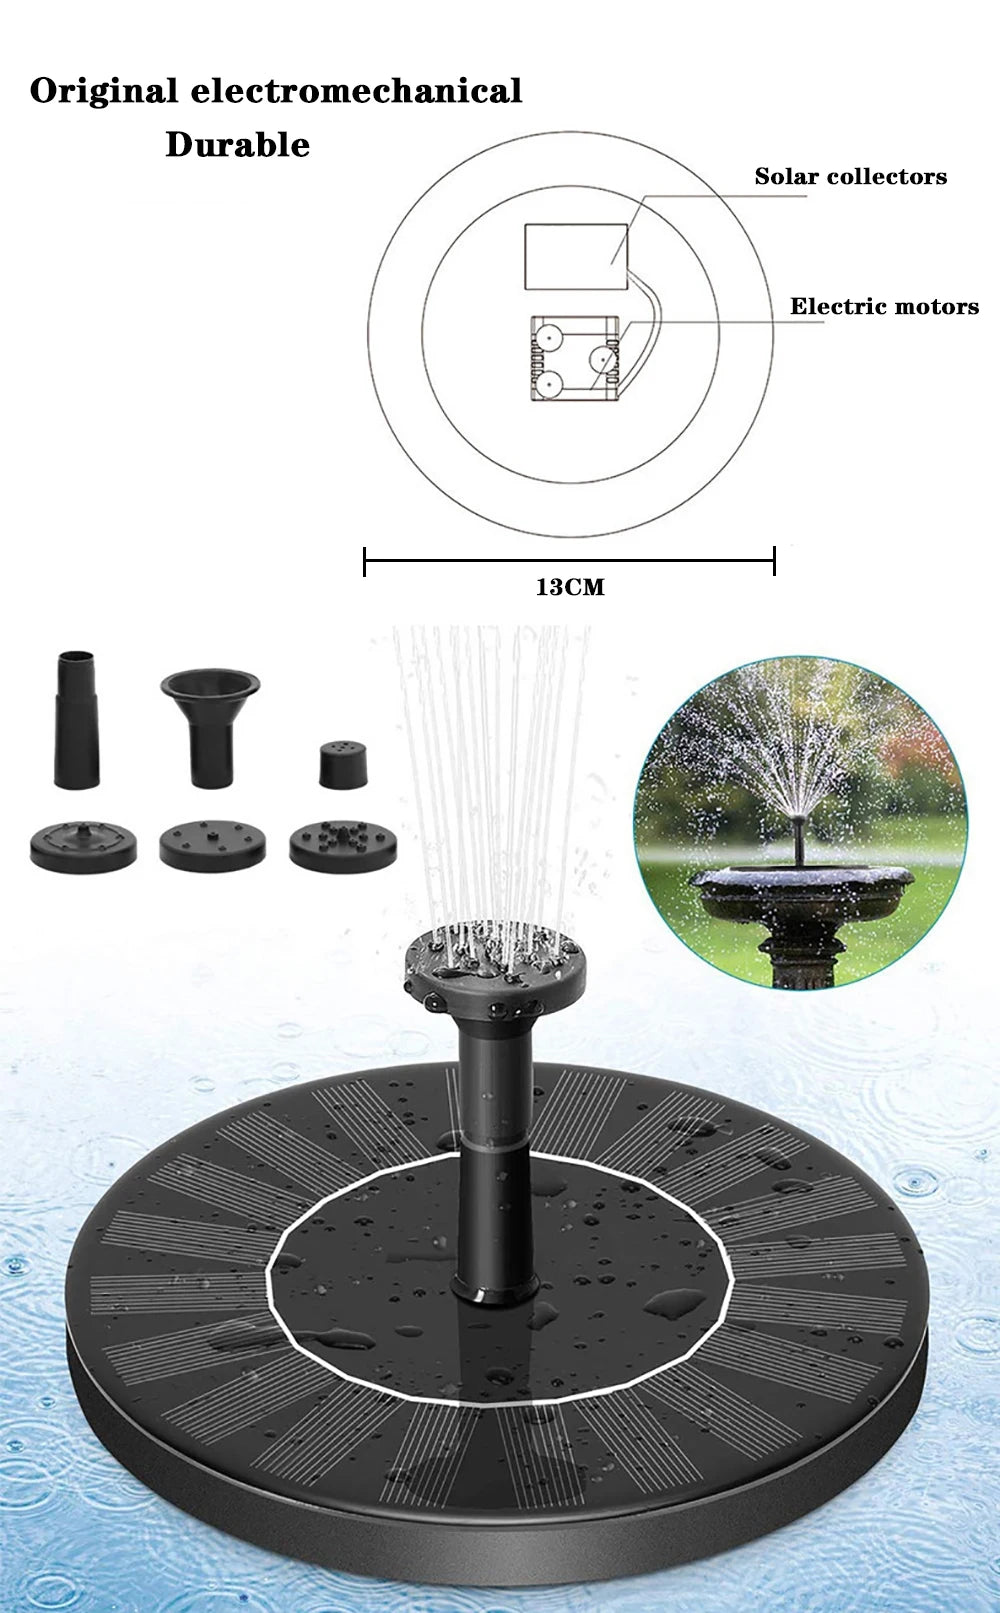 Mini Solar Water Fountain, Mini solar-powered water fountain features durable design with electric motor and 13cm collector.